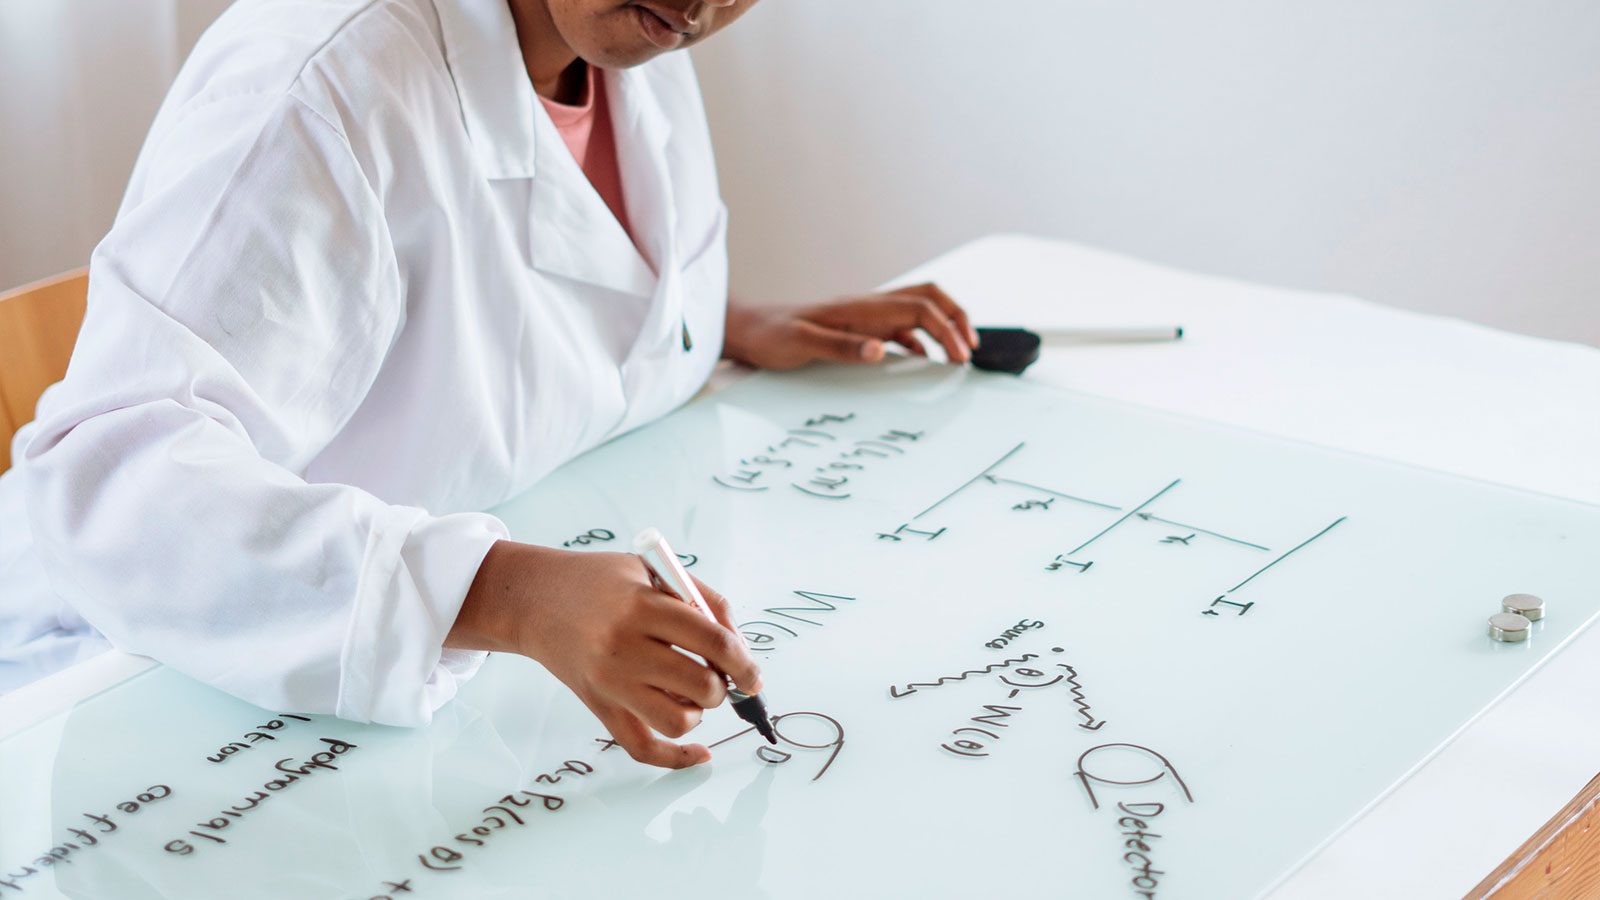 A scientist working out equations on a whiteboard